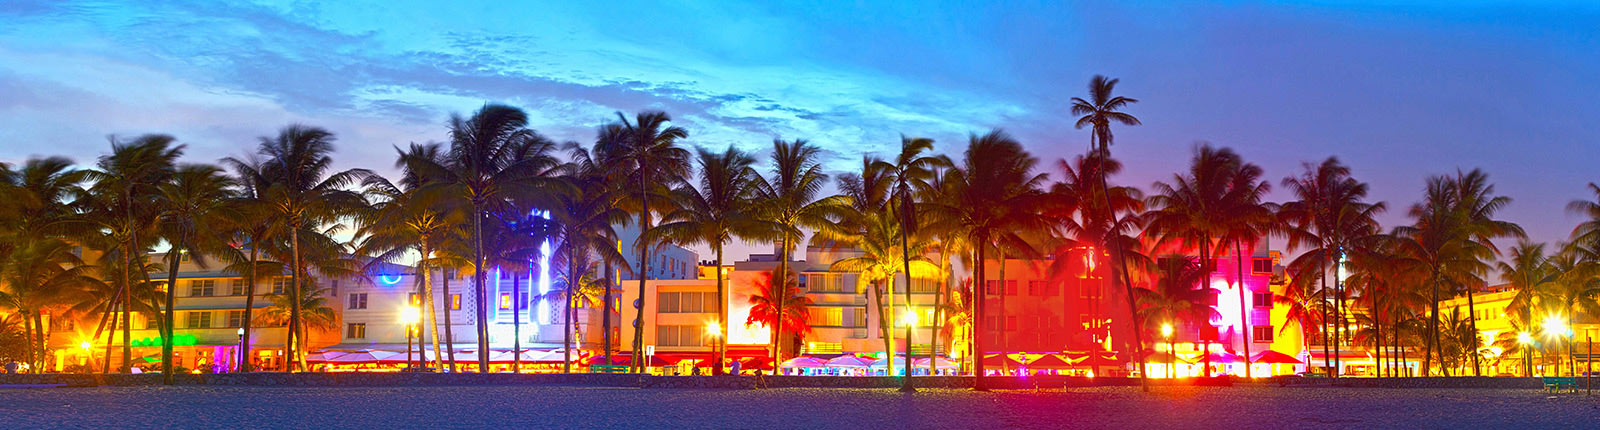 Iconic colorfully lit buildings and palm trees in Miami, FL